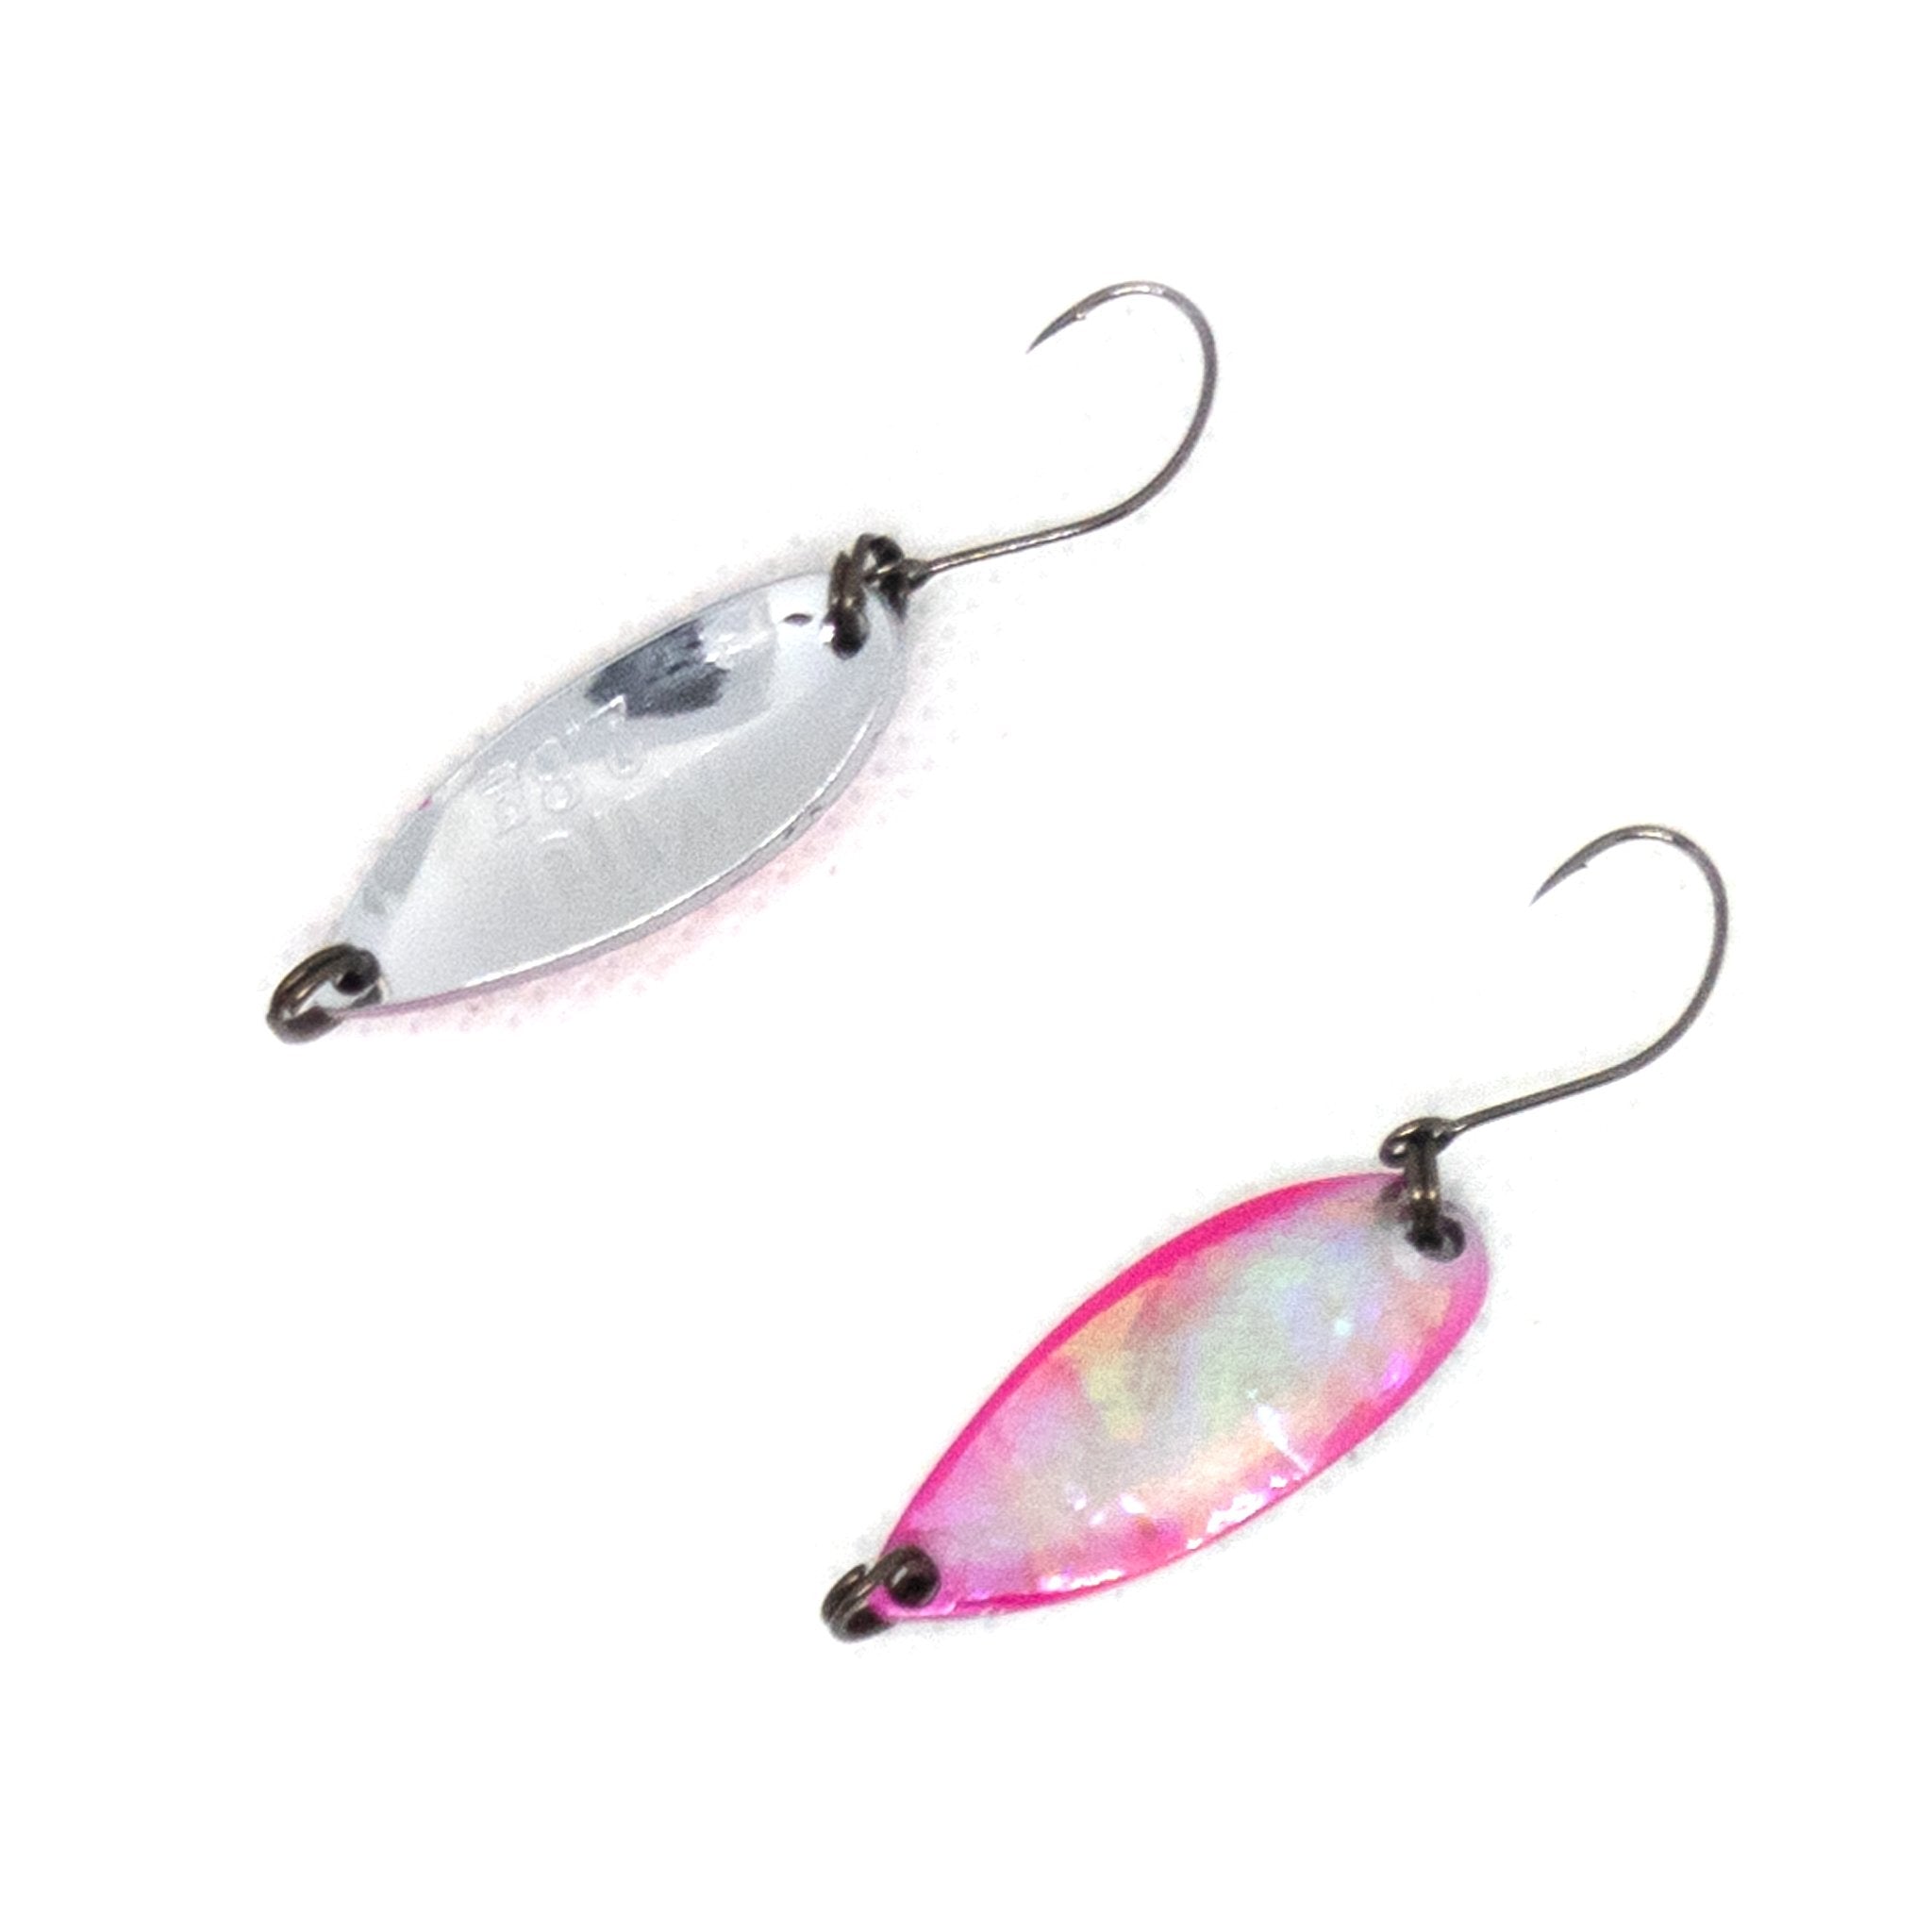 Forest MIU 2.8g Trout Spoon Native Abalone Color #05 – The